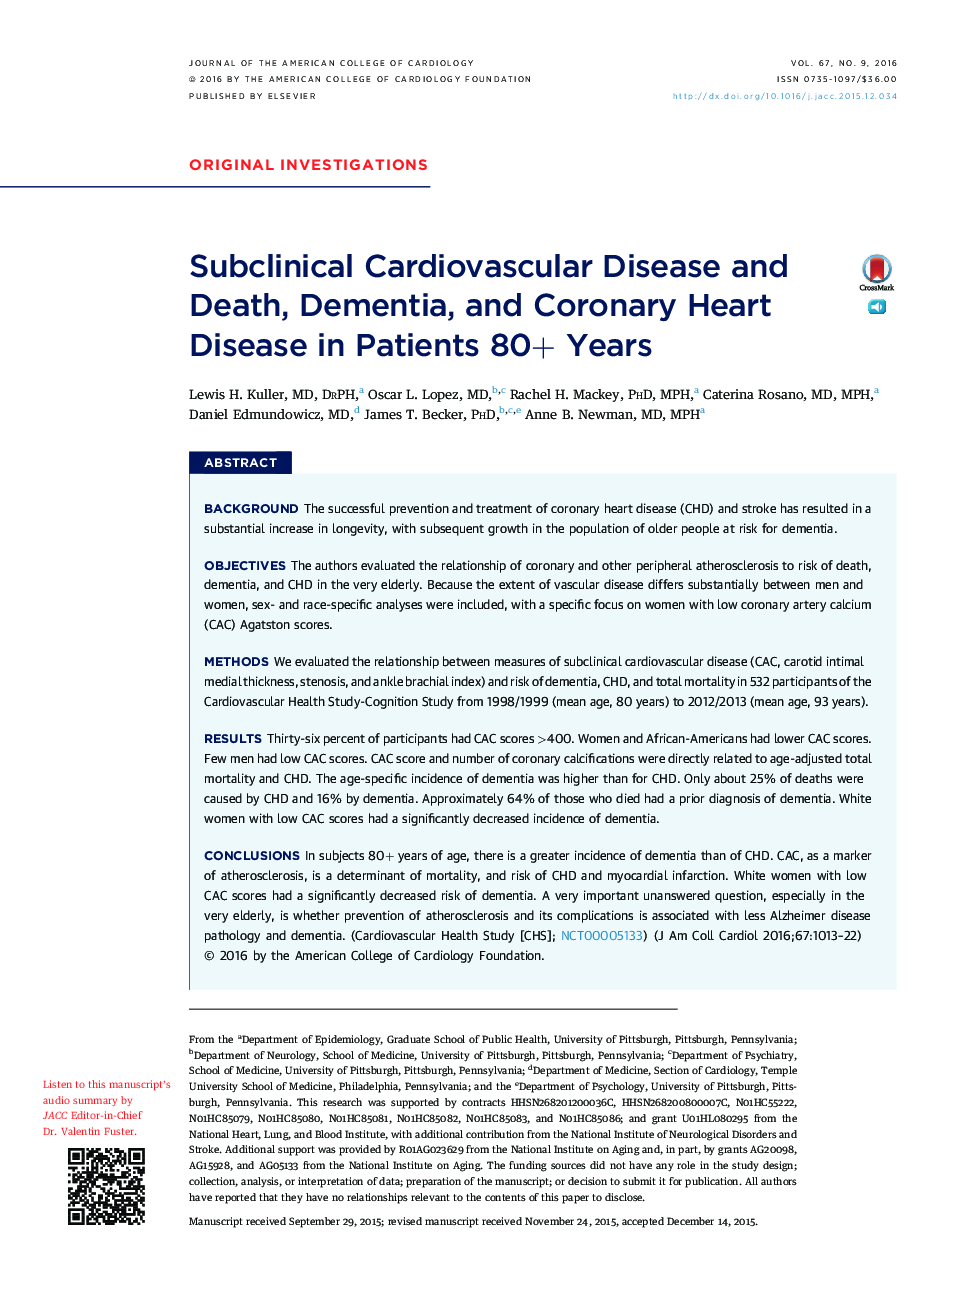 Subclinical Cardiovascular Disease and Death, Dementia, and Coronary Heart Disease in Patients 80+ Years